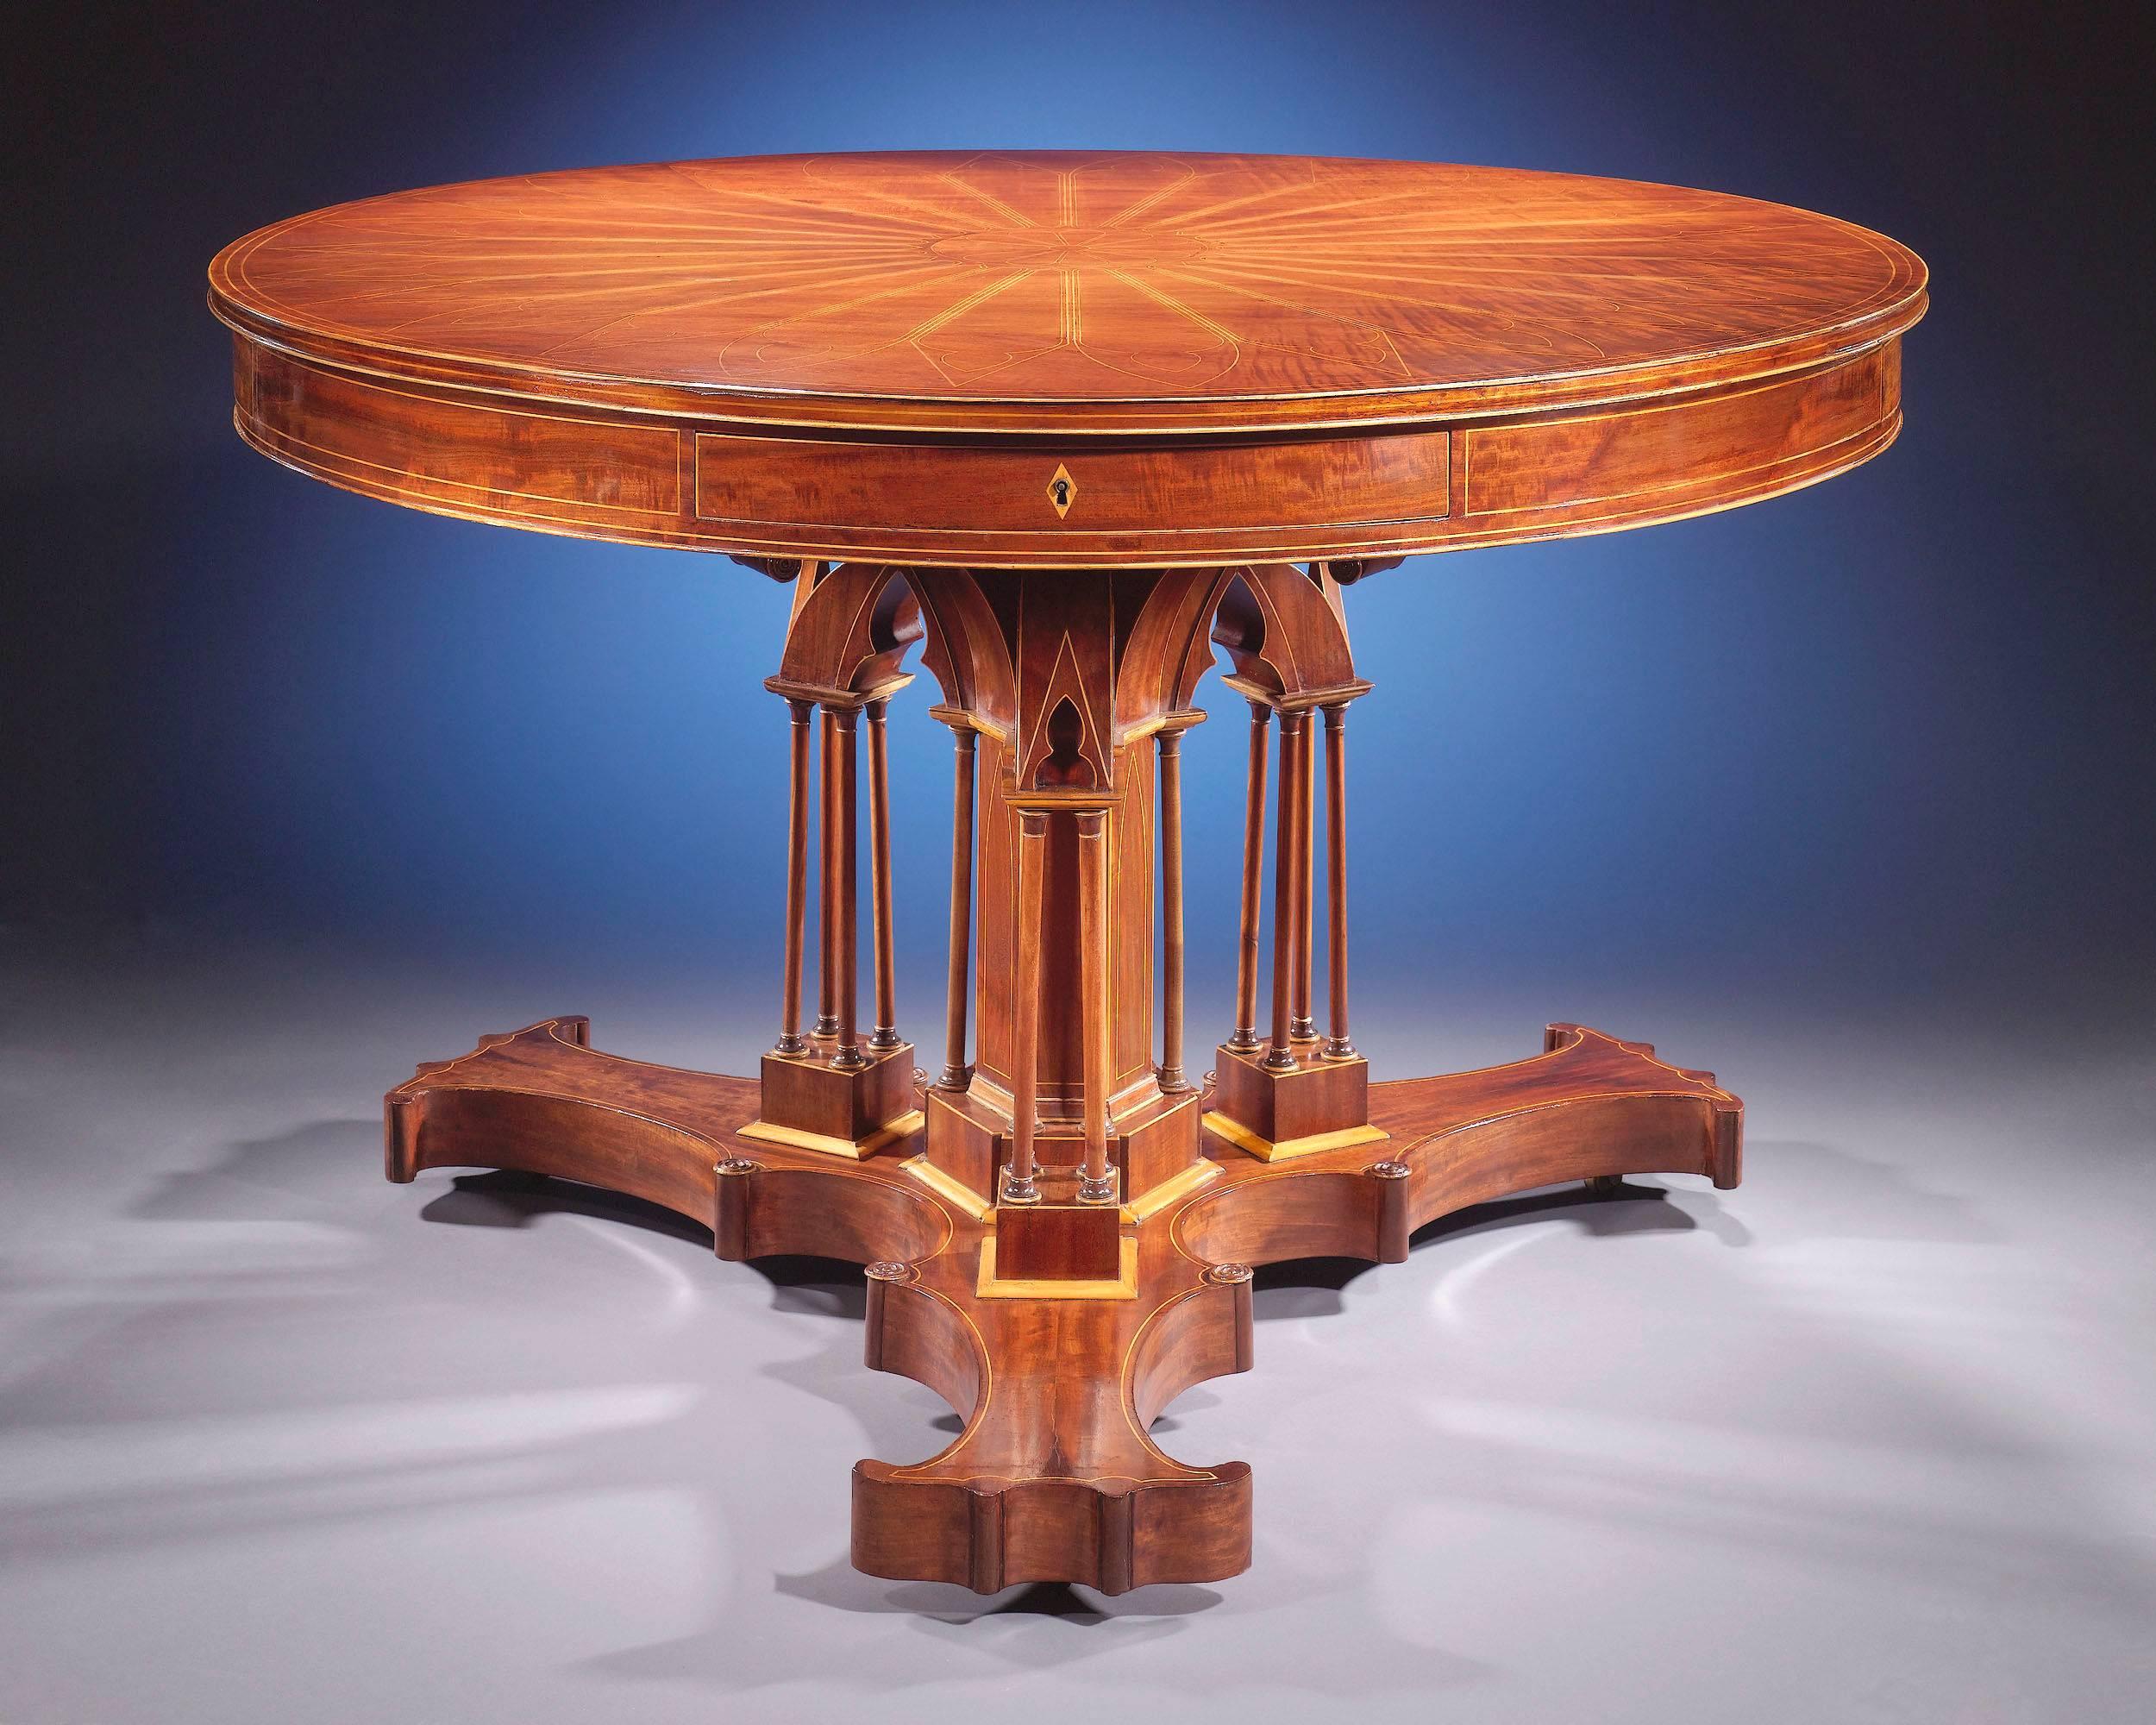 This exceptional Charles X mahogany drum table, attributed to Alphonse Giroux and Company of Paris, a firm celebrated for their small luxury objets d'art and furniture created with precious materials. The table is conceived in the early 19th century